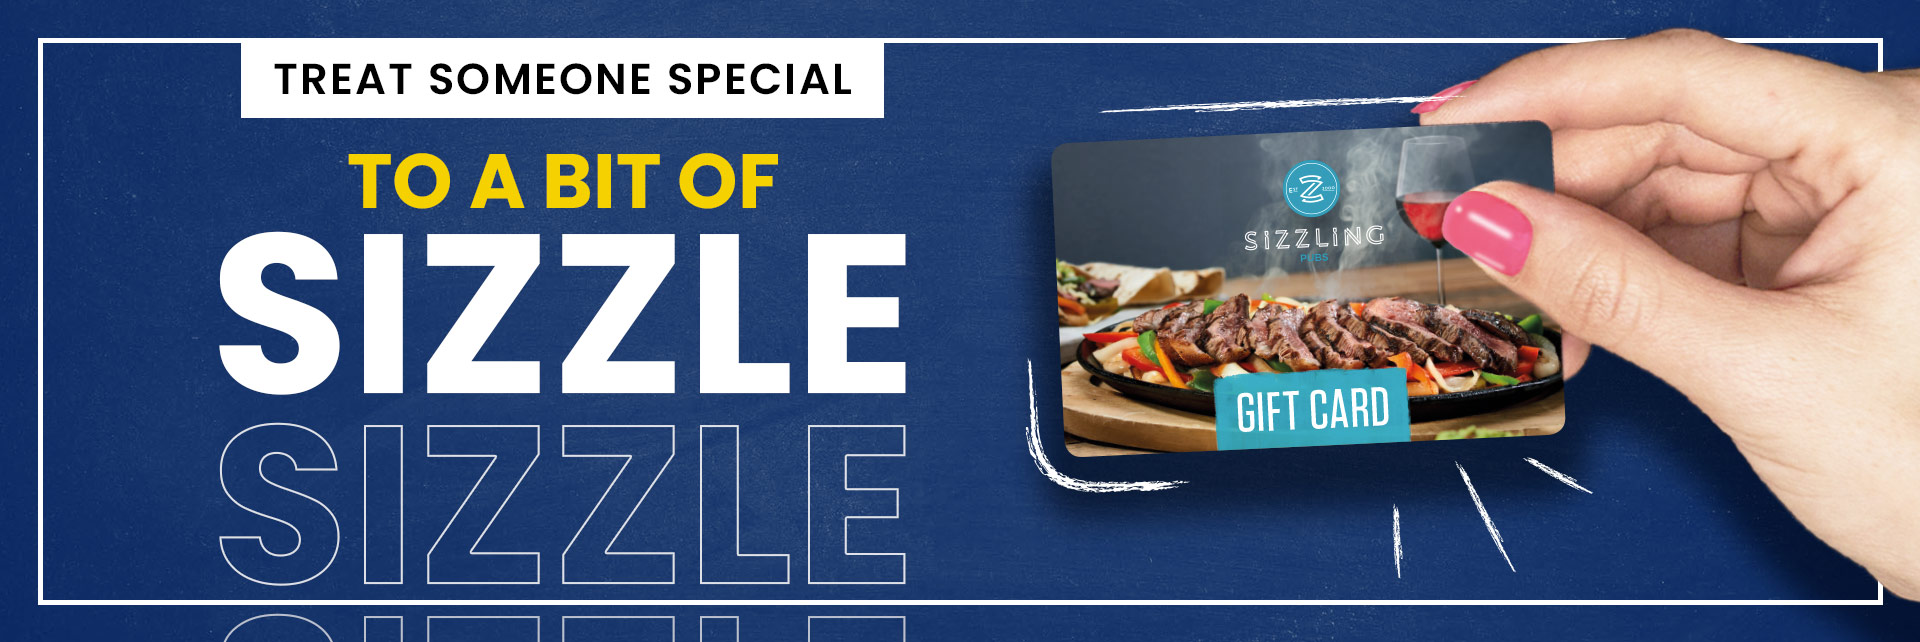 Sizzling Pubs Gift Card at The Top of The World in Hemel Hempstead